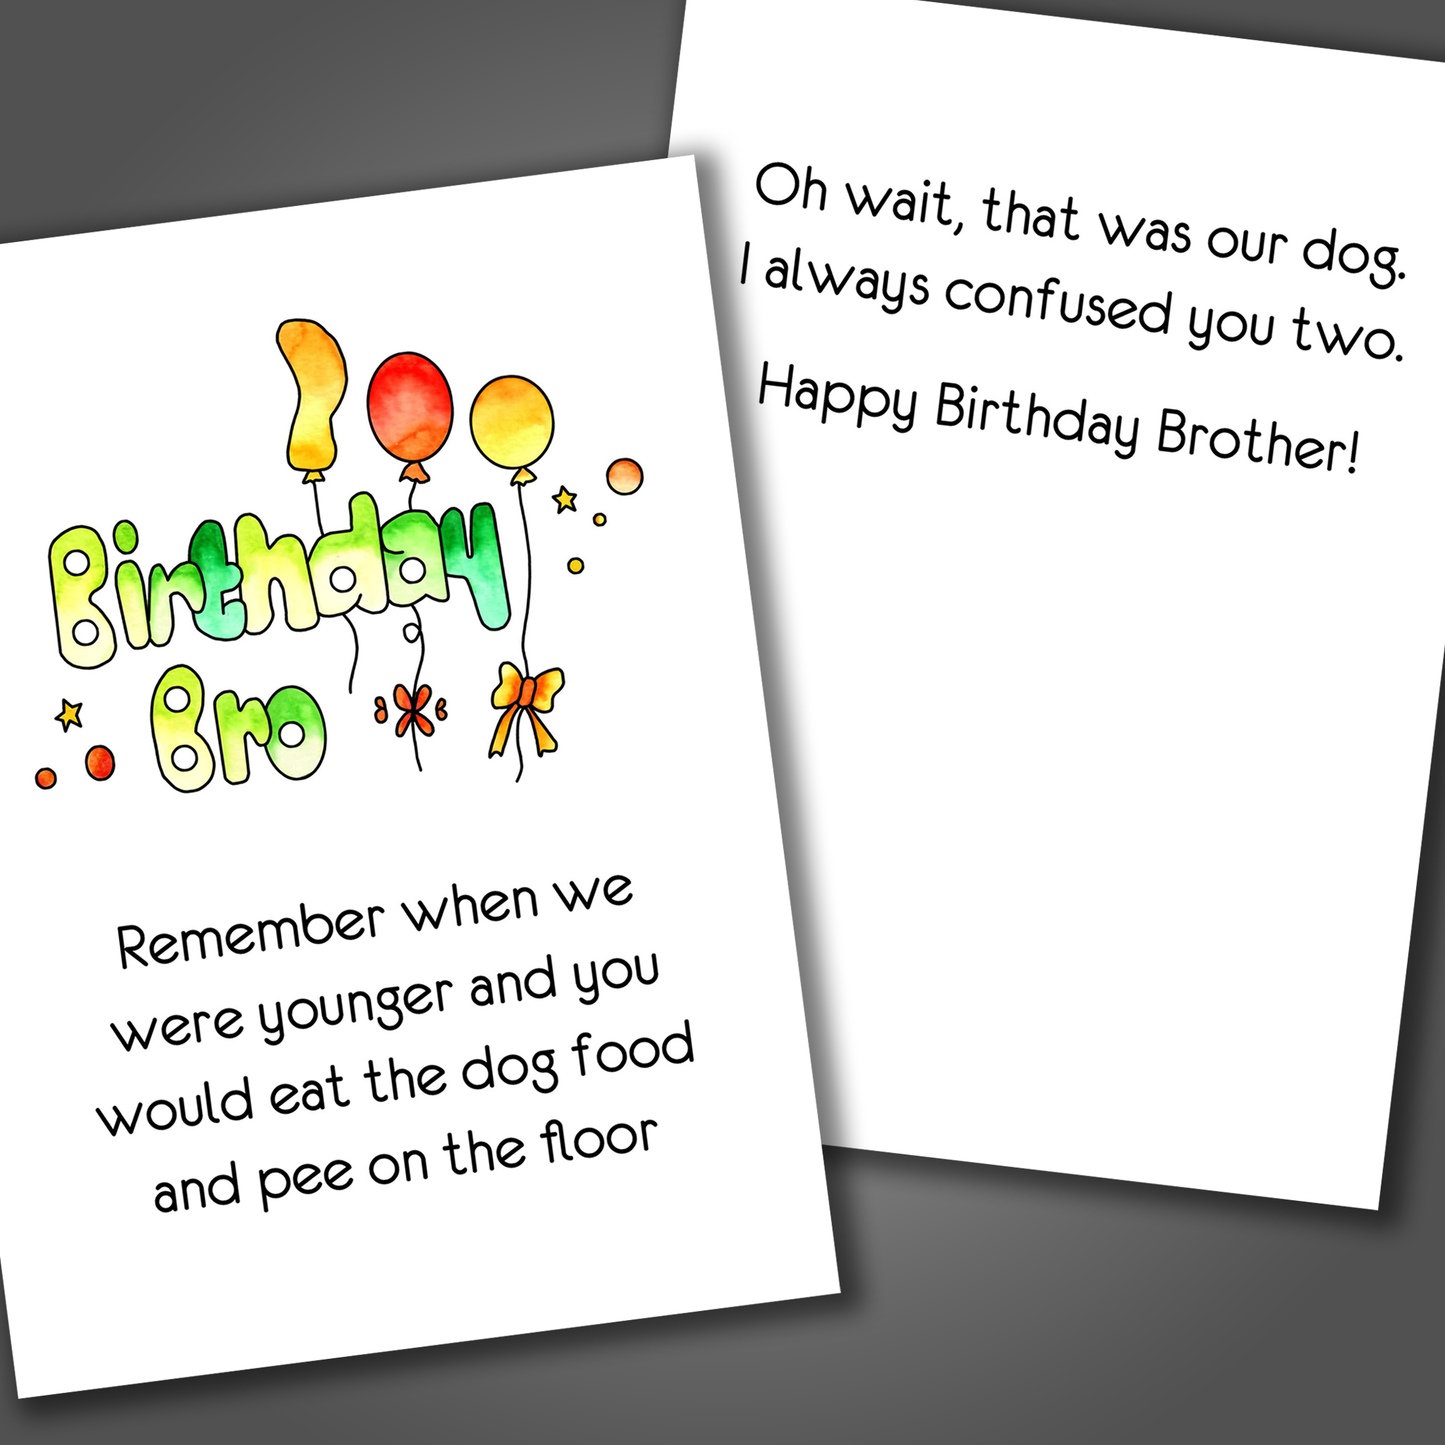 Funny happy birthday card for brother with phrase birthday bro drawn on front of card in green and a funny joke inside of the card that ends in happy birthday brother!